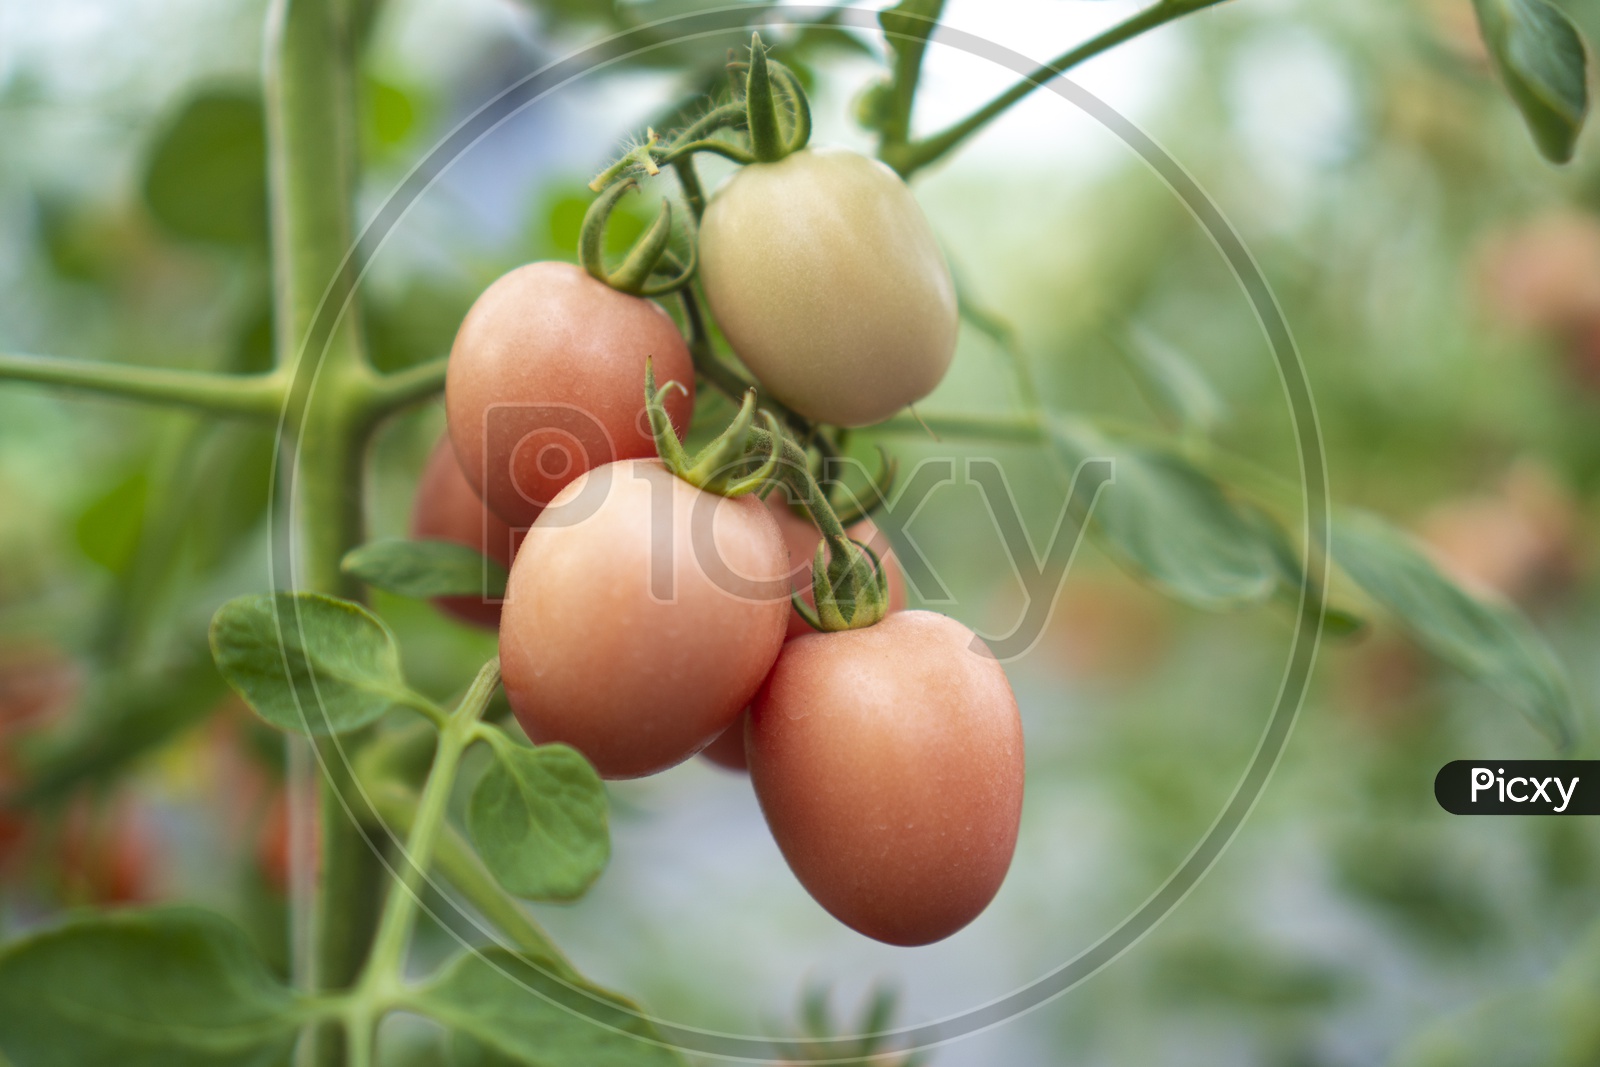 Tomatoes Growing In a Organic Farm  or Green House  by Modern Techniques